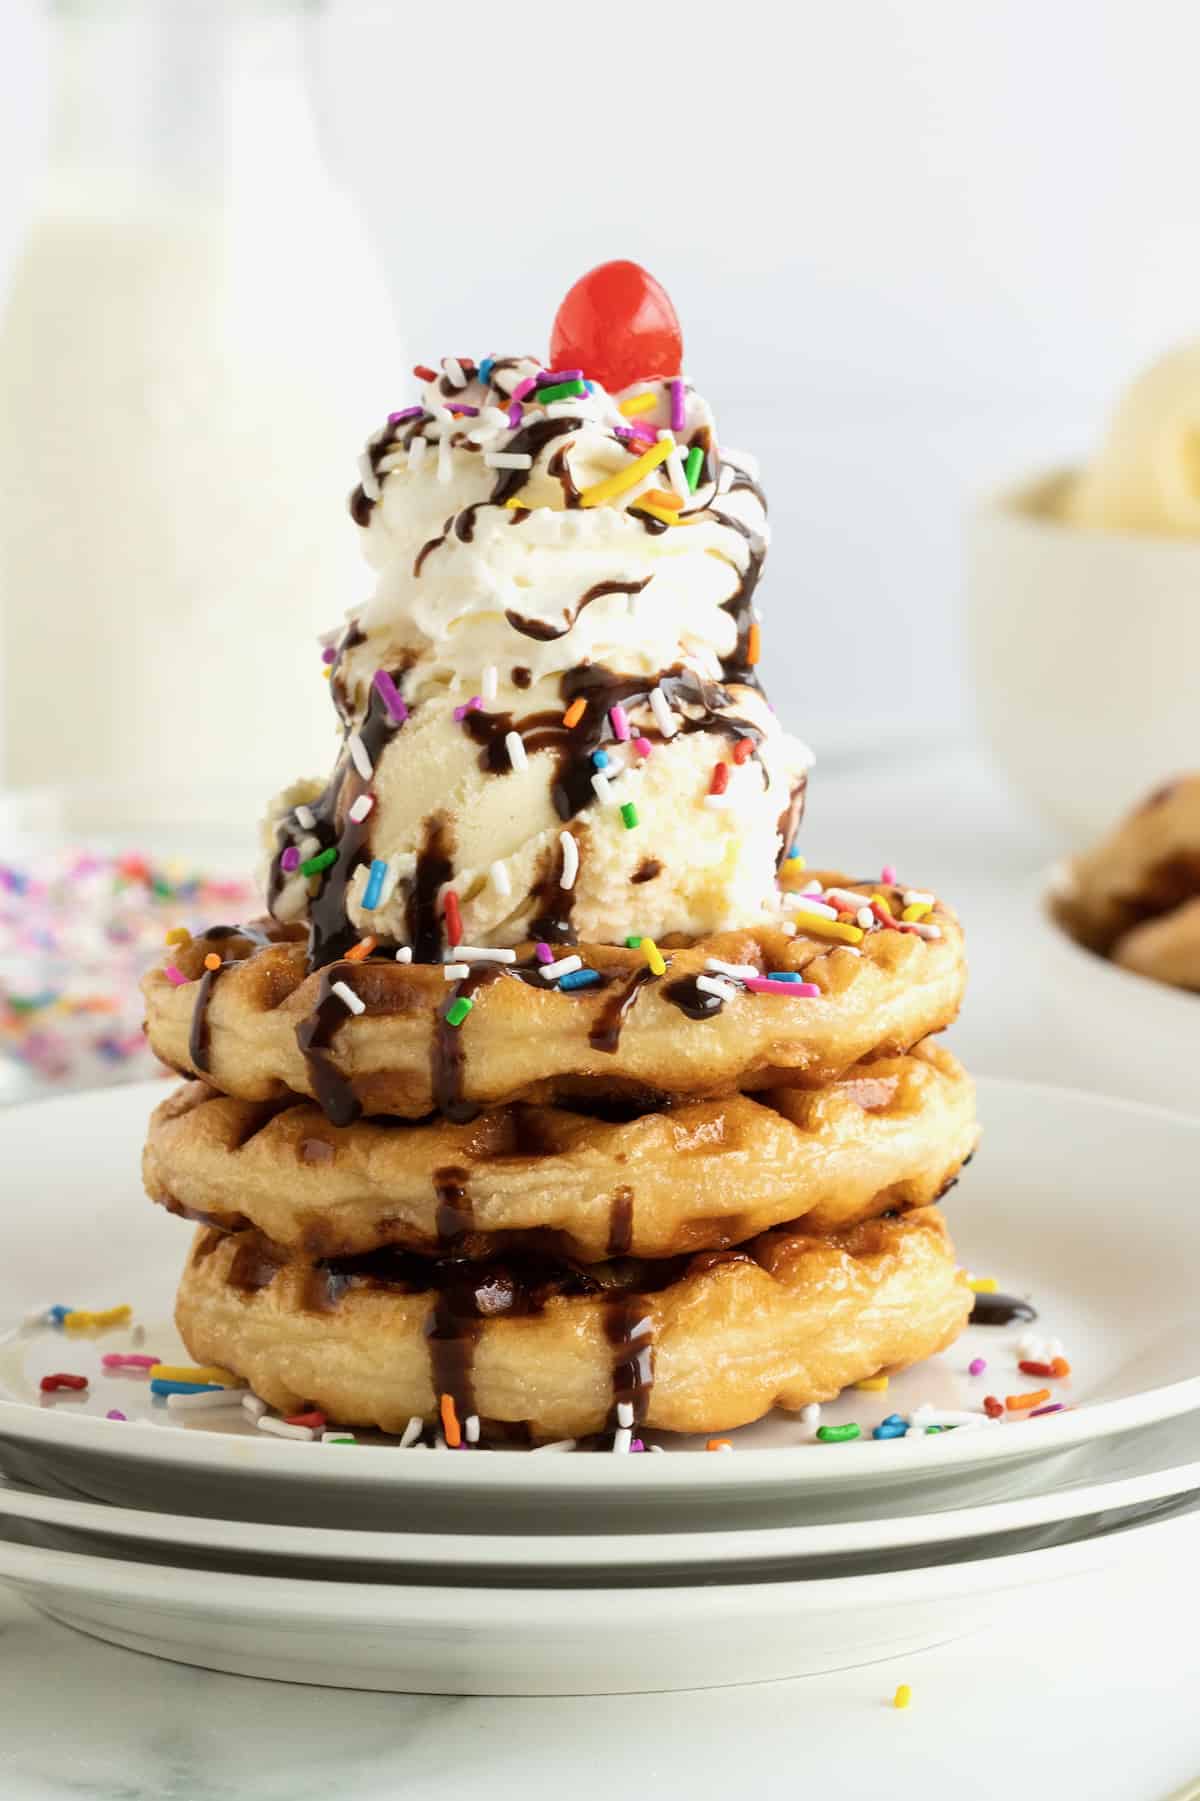 An ice cream sundae made with a stack of three donut waffles, two scoops of vanilla ice cream, chocolate sauce, rainbow sprinkles and a cherry on top.